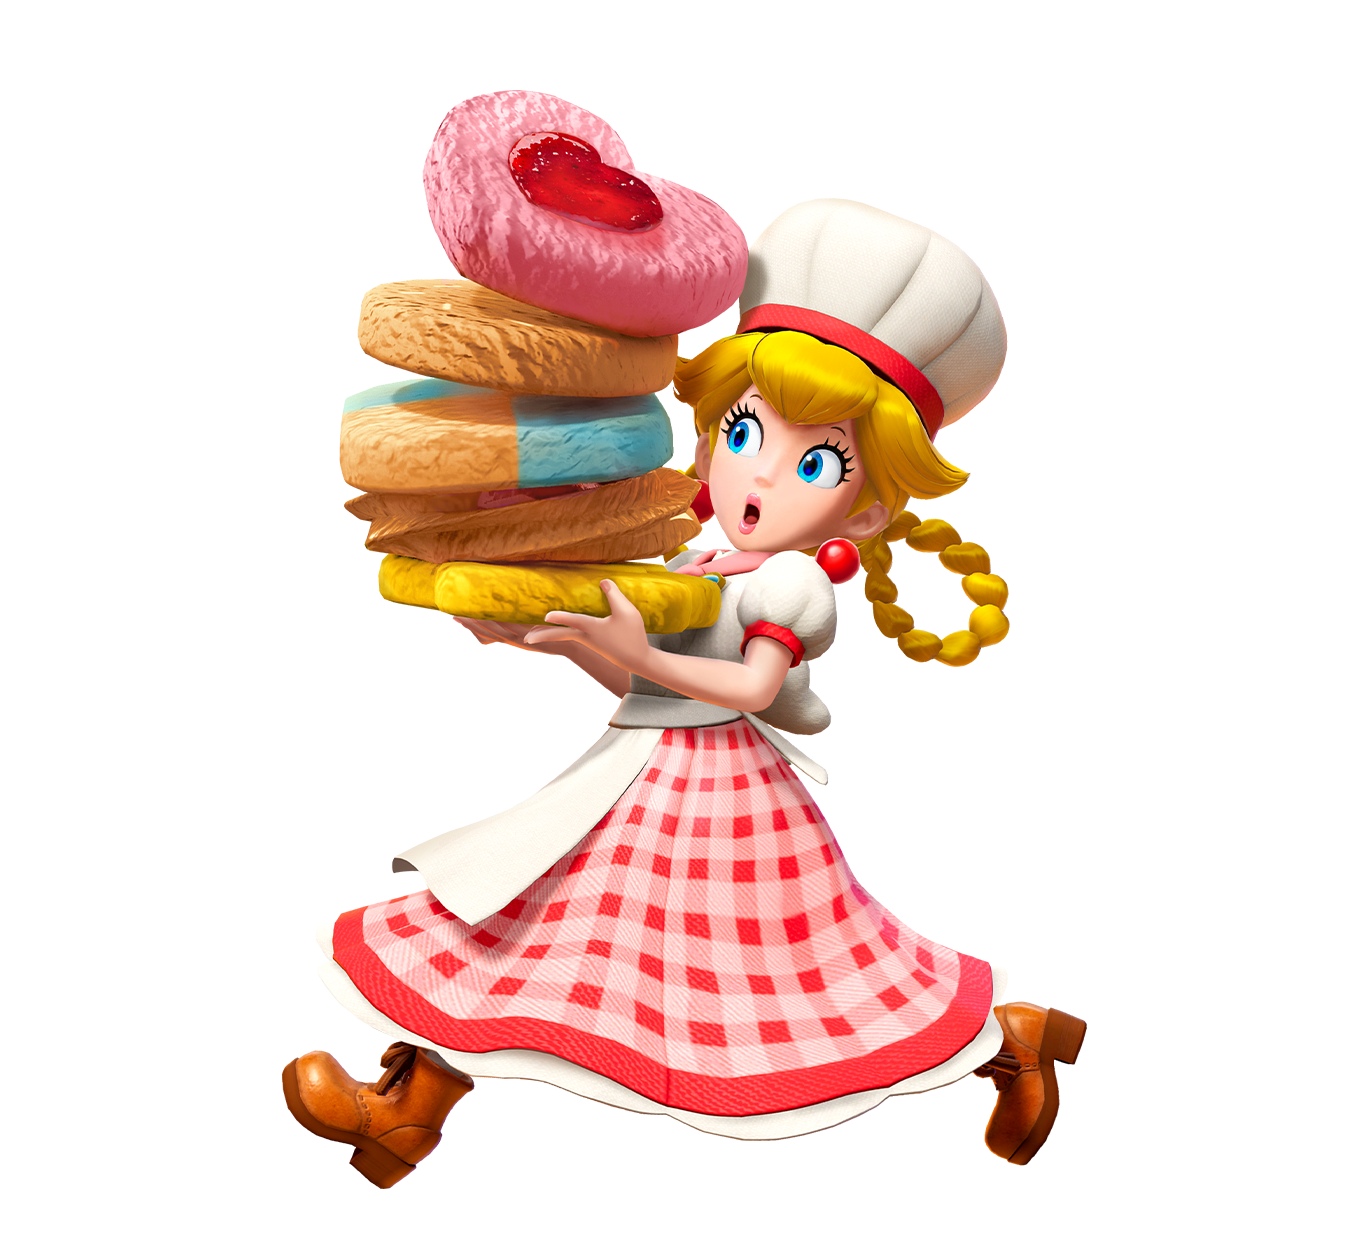 Peach, wearing a checkered red dress and a baker's hat, carries a stack of scrumptious cookies that are threatening to topple over.